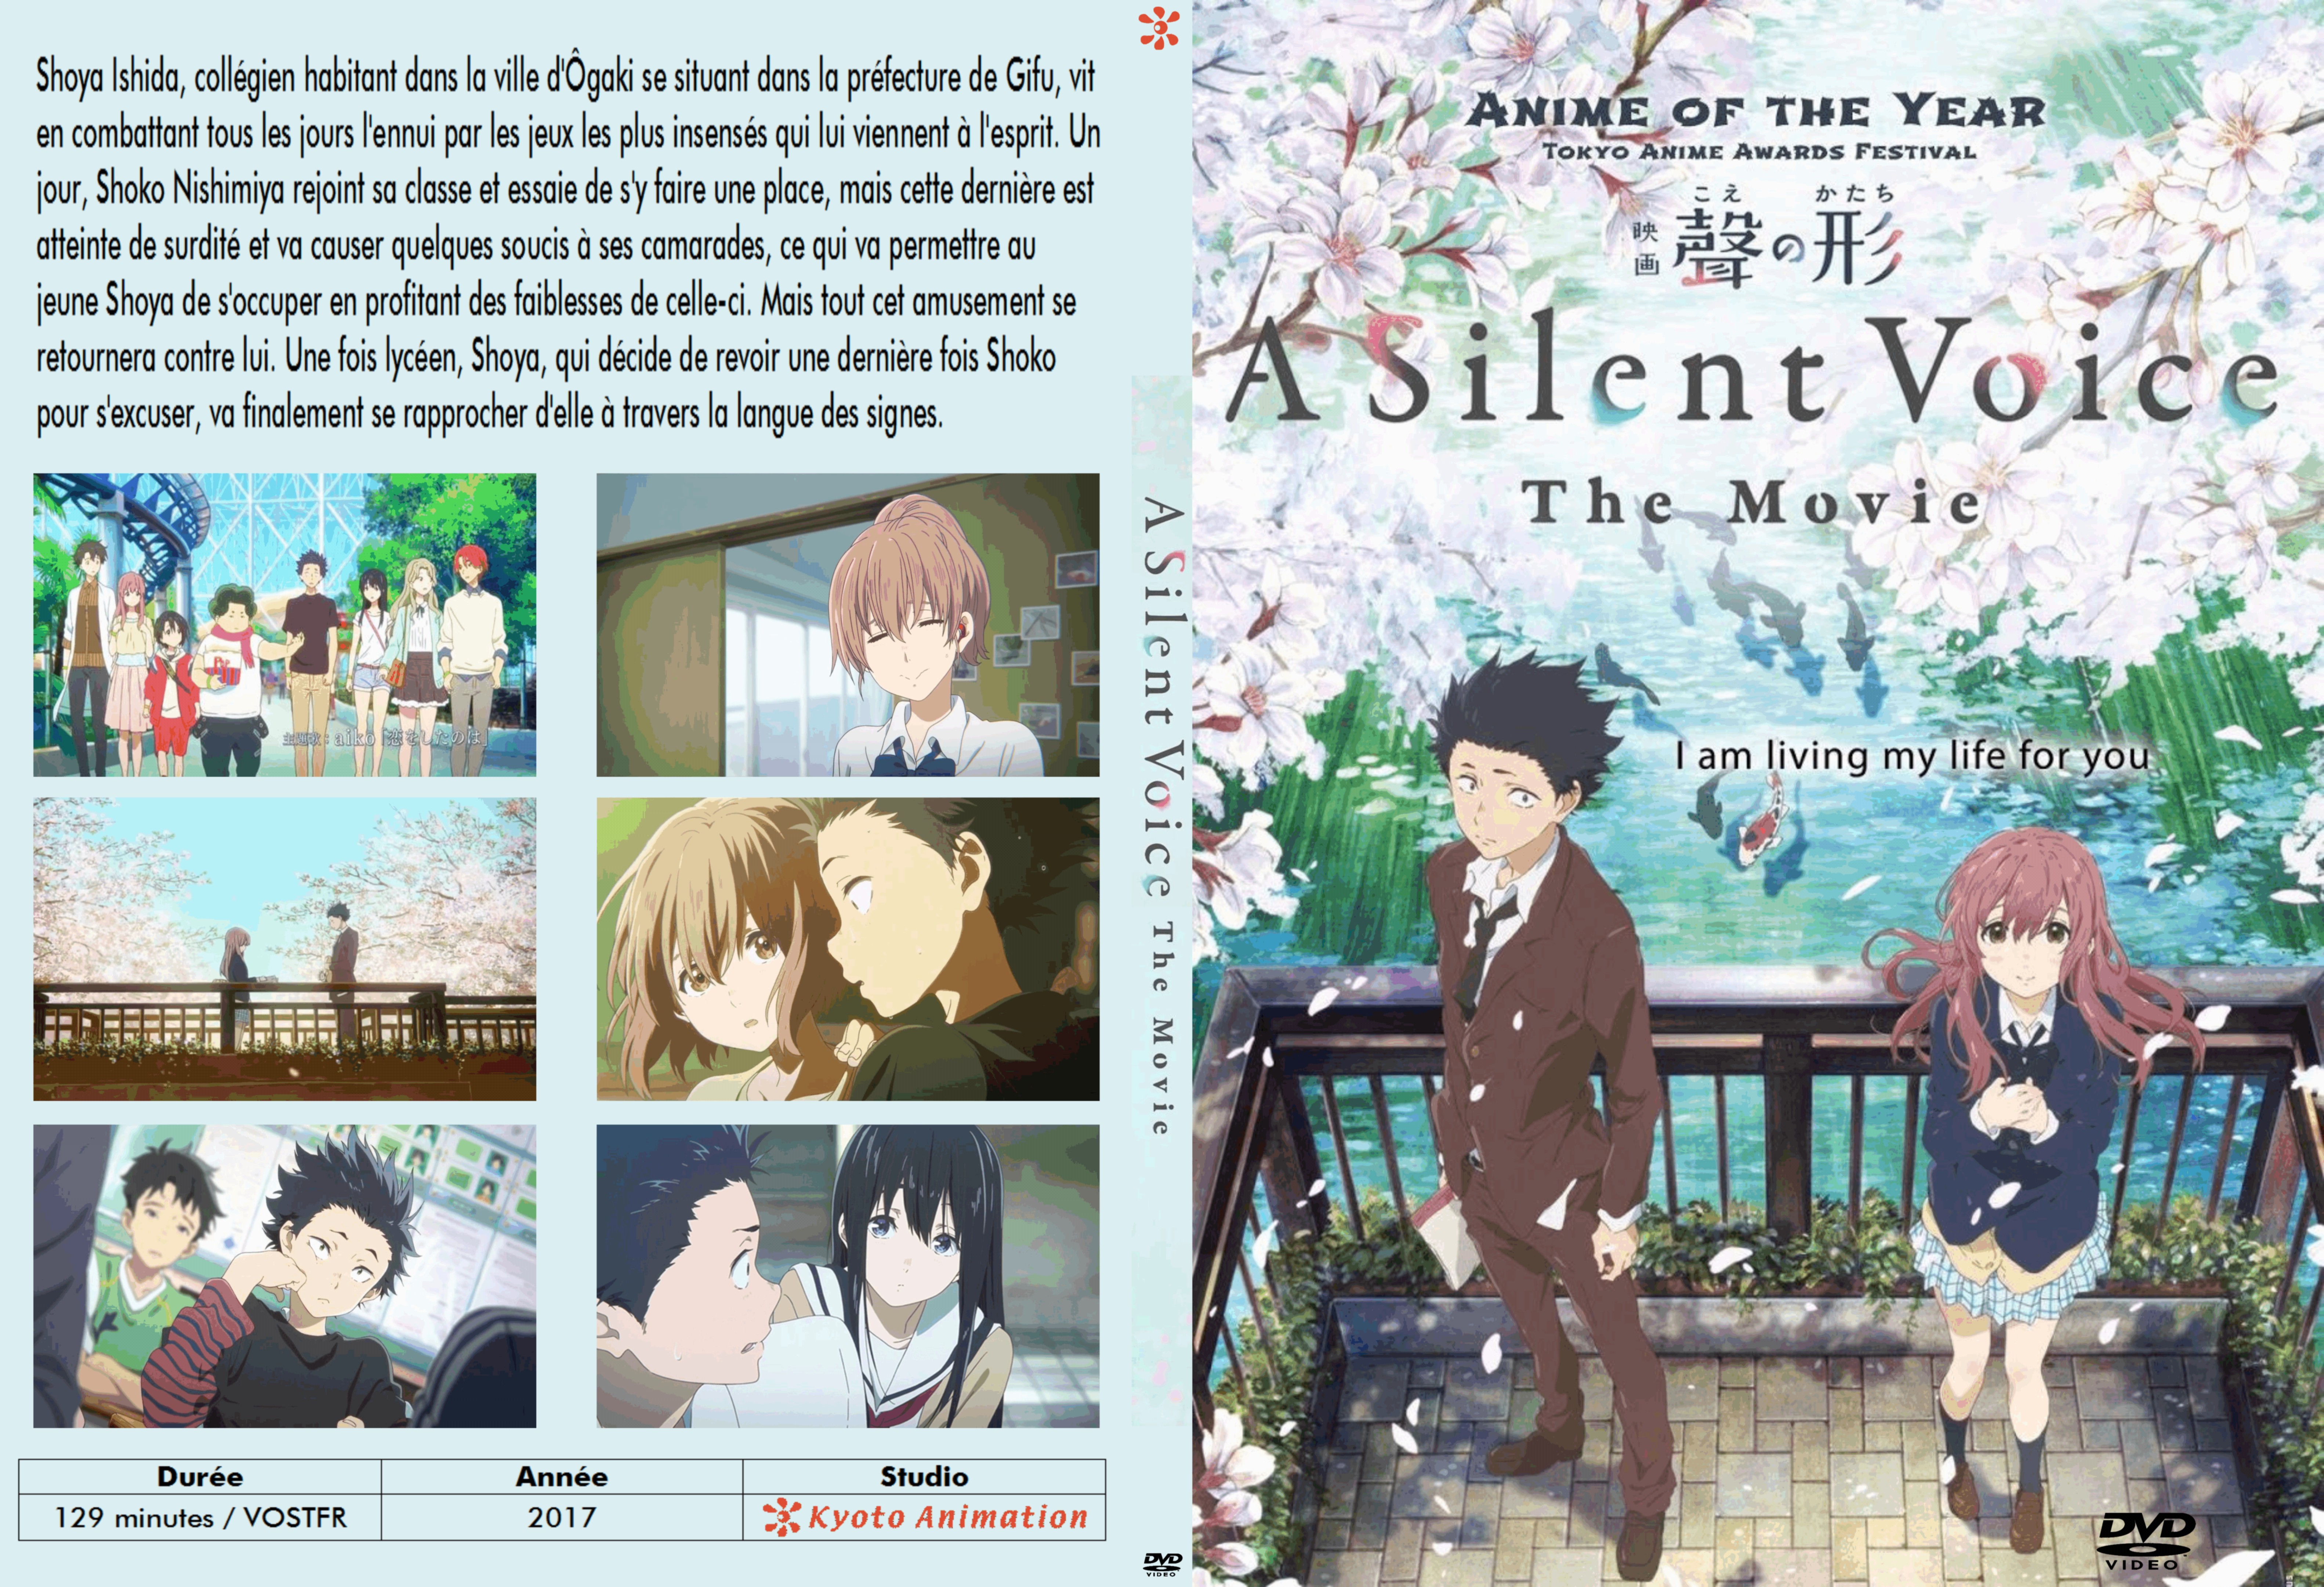 Jaquette DVD A silent voice the movie custom